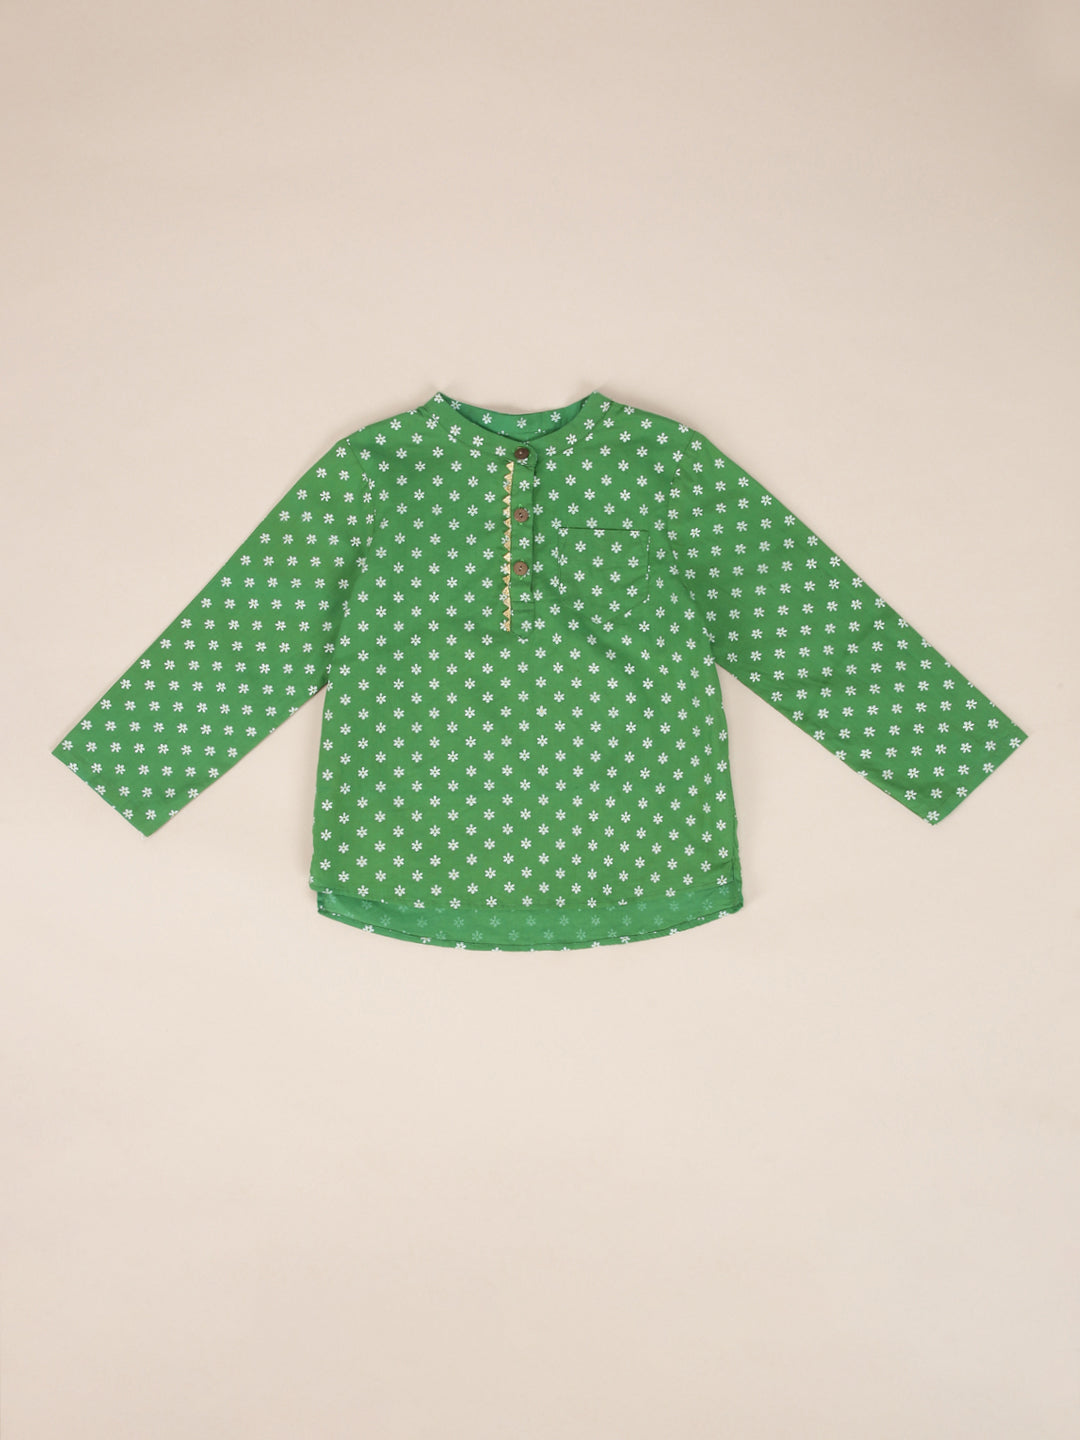 Boys Cotton Shirt Full Sleeves Green - 2 yrs to 12 yrs - Front